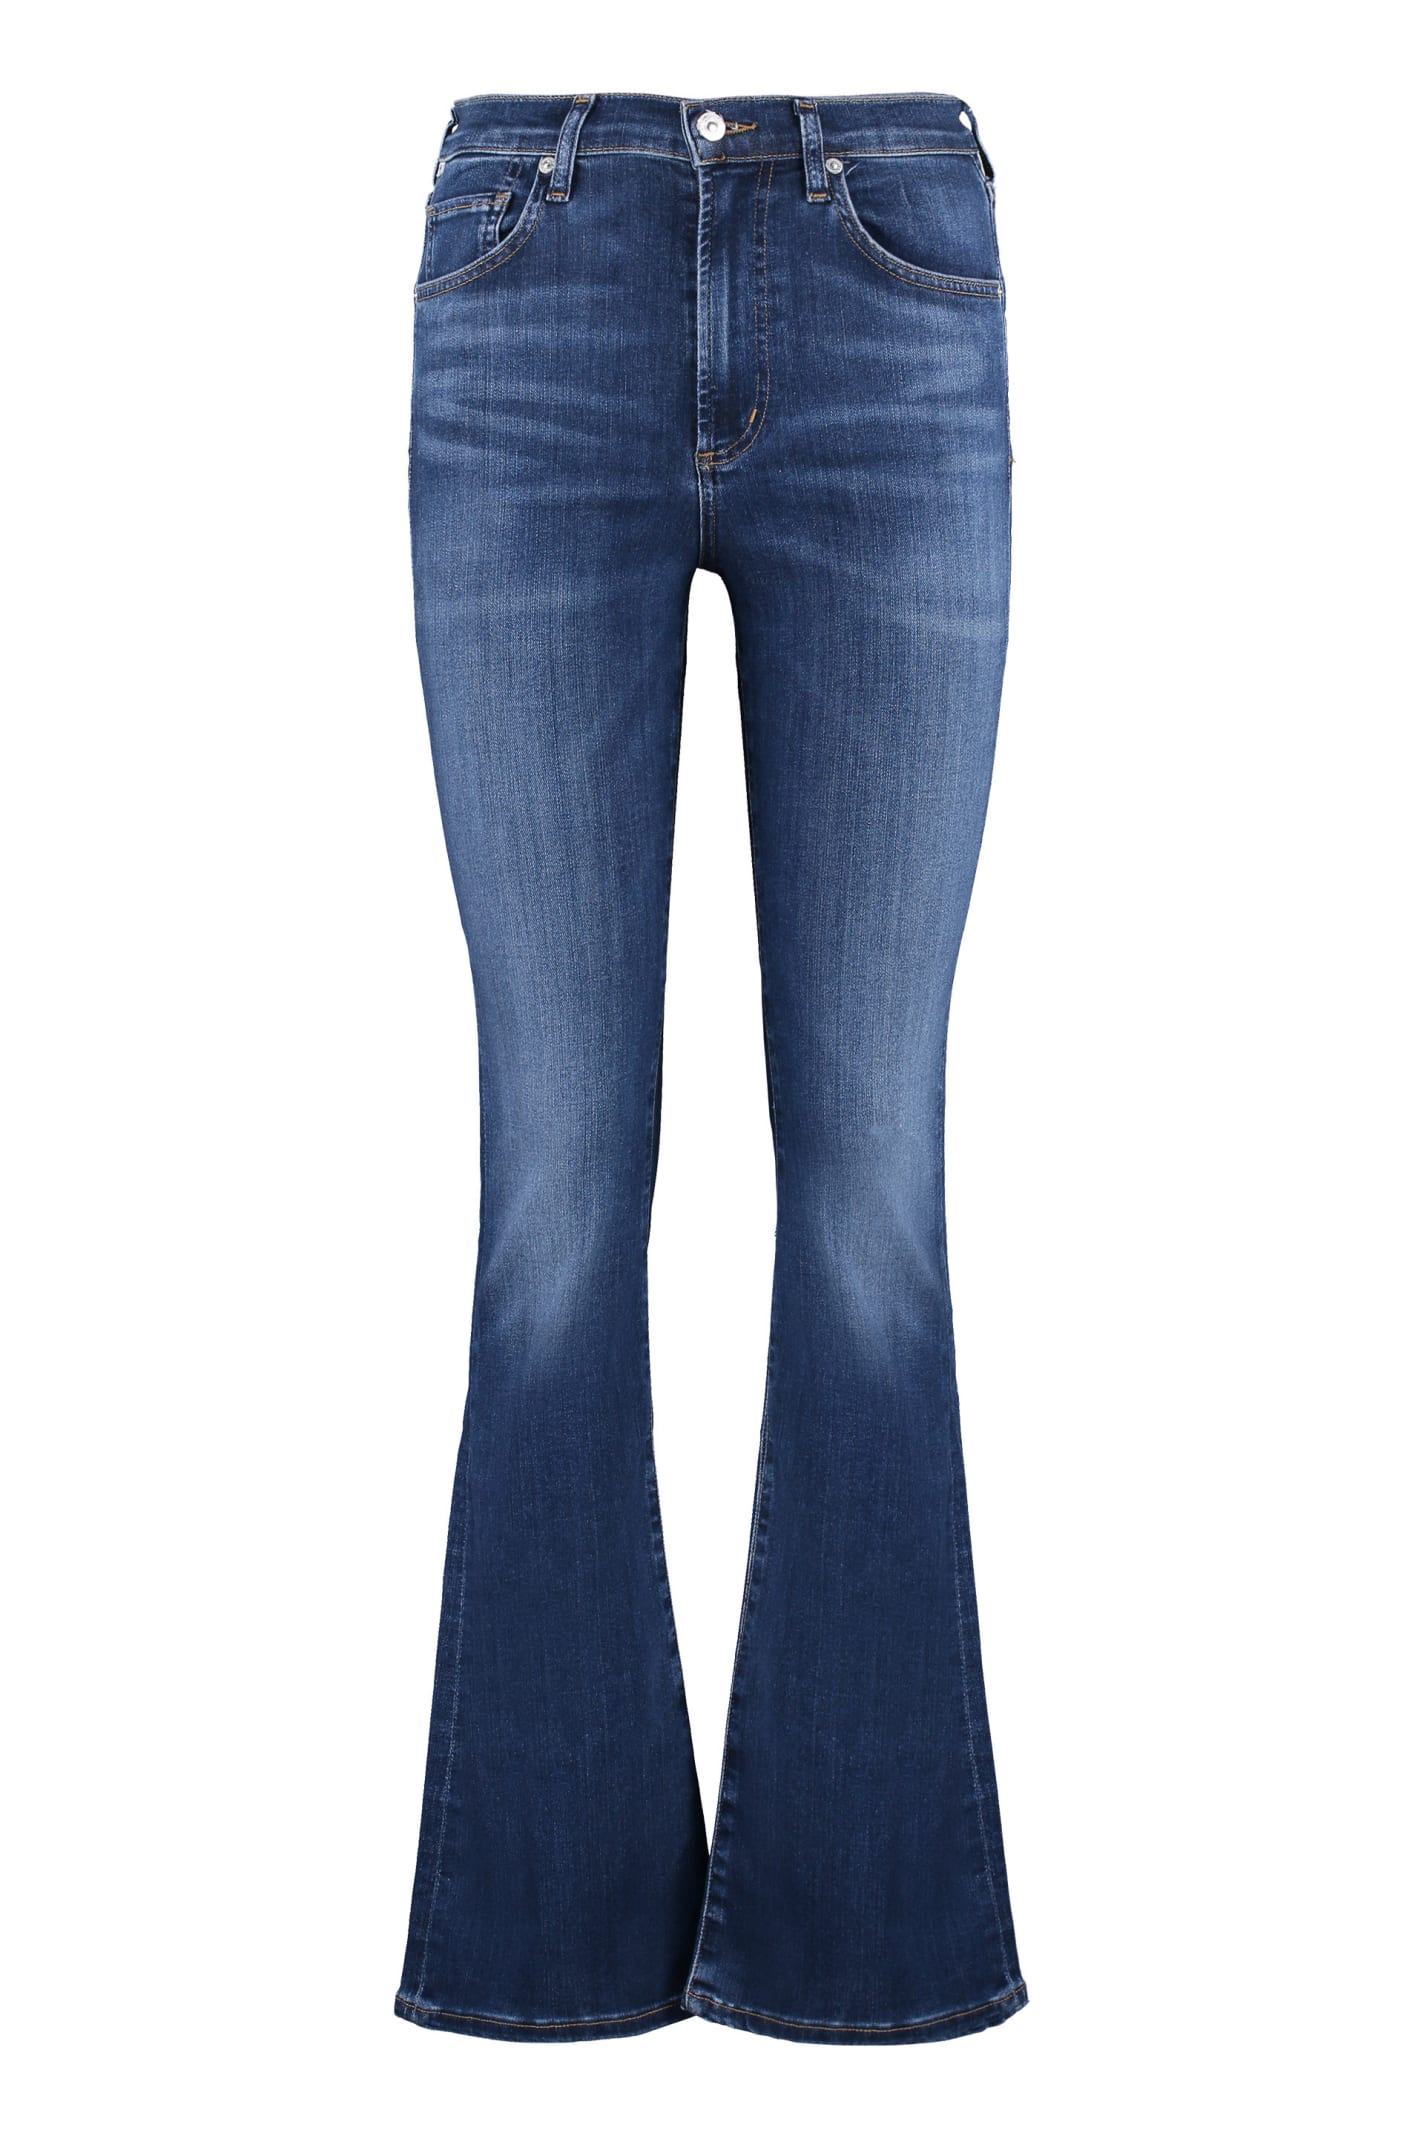 CITIZENS OF HUMANITY LILAH BOOTCUT JEANS